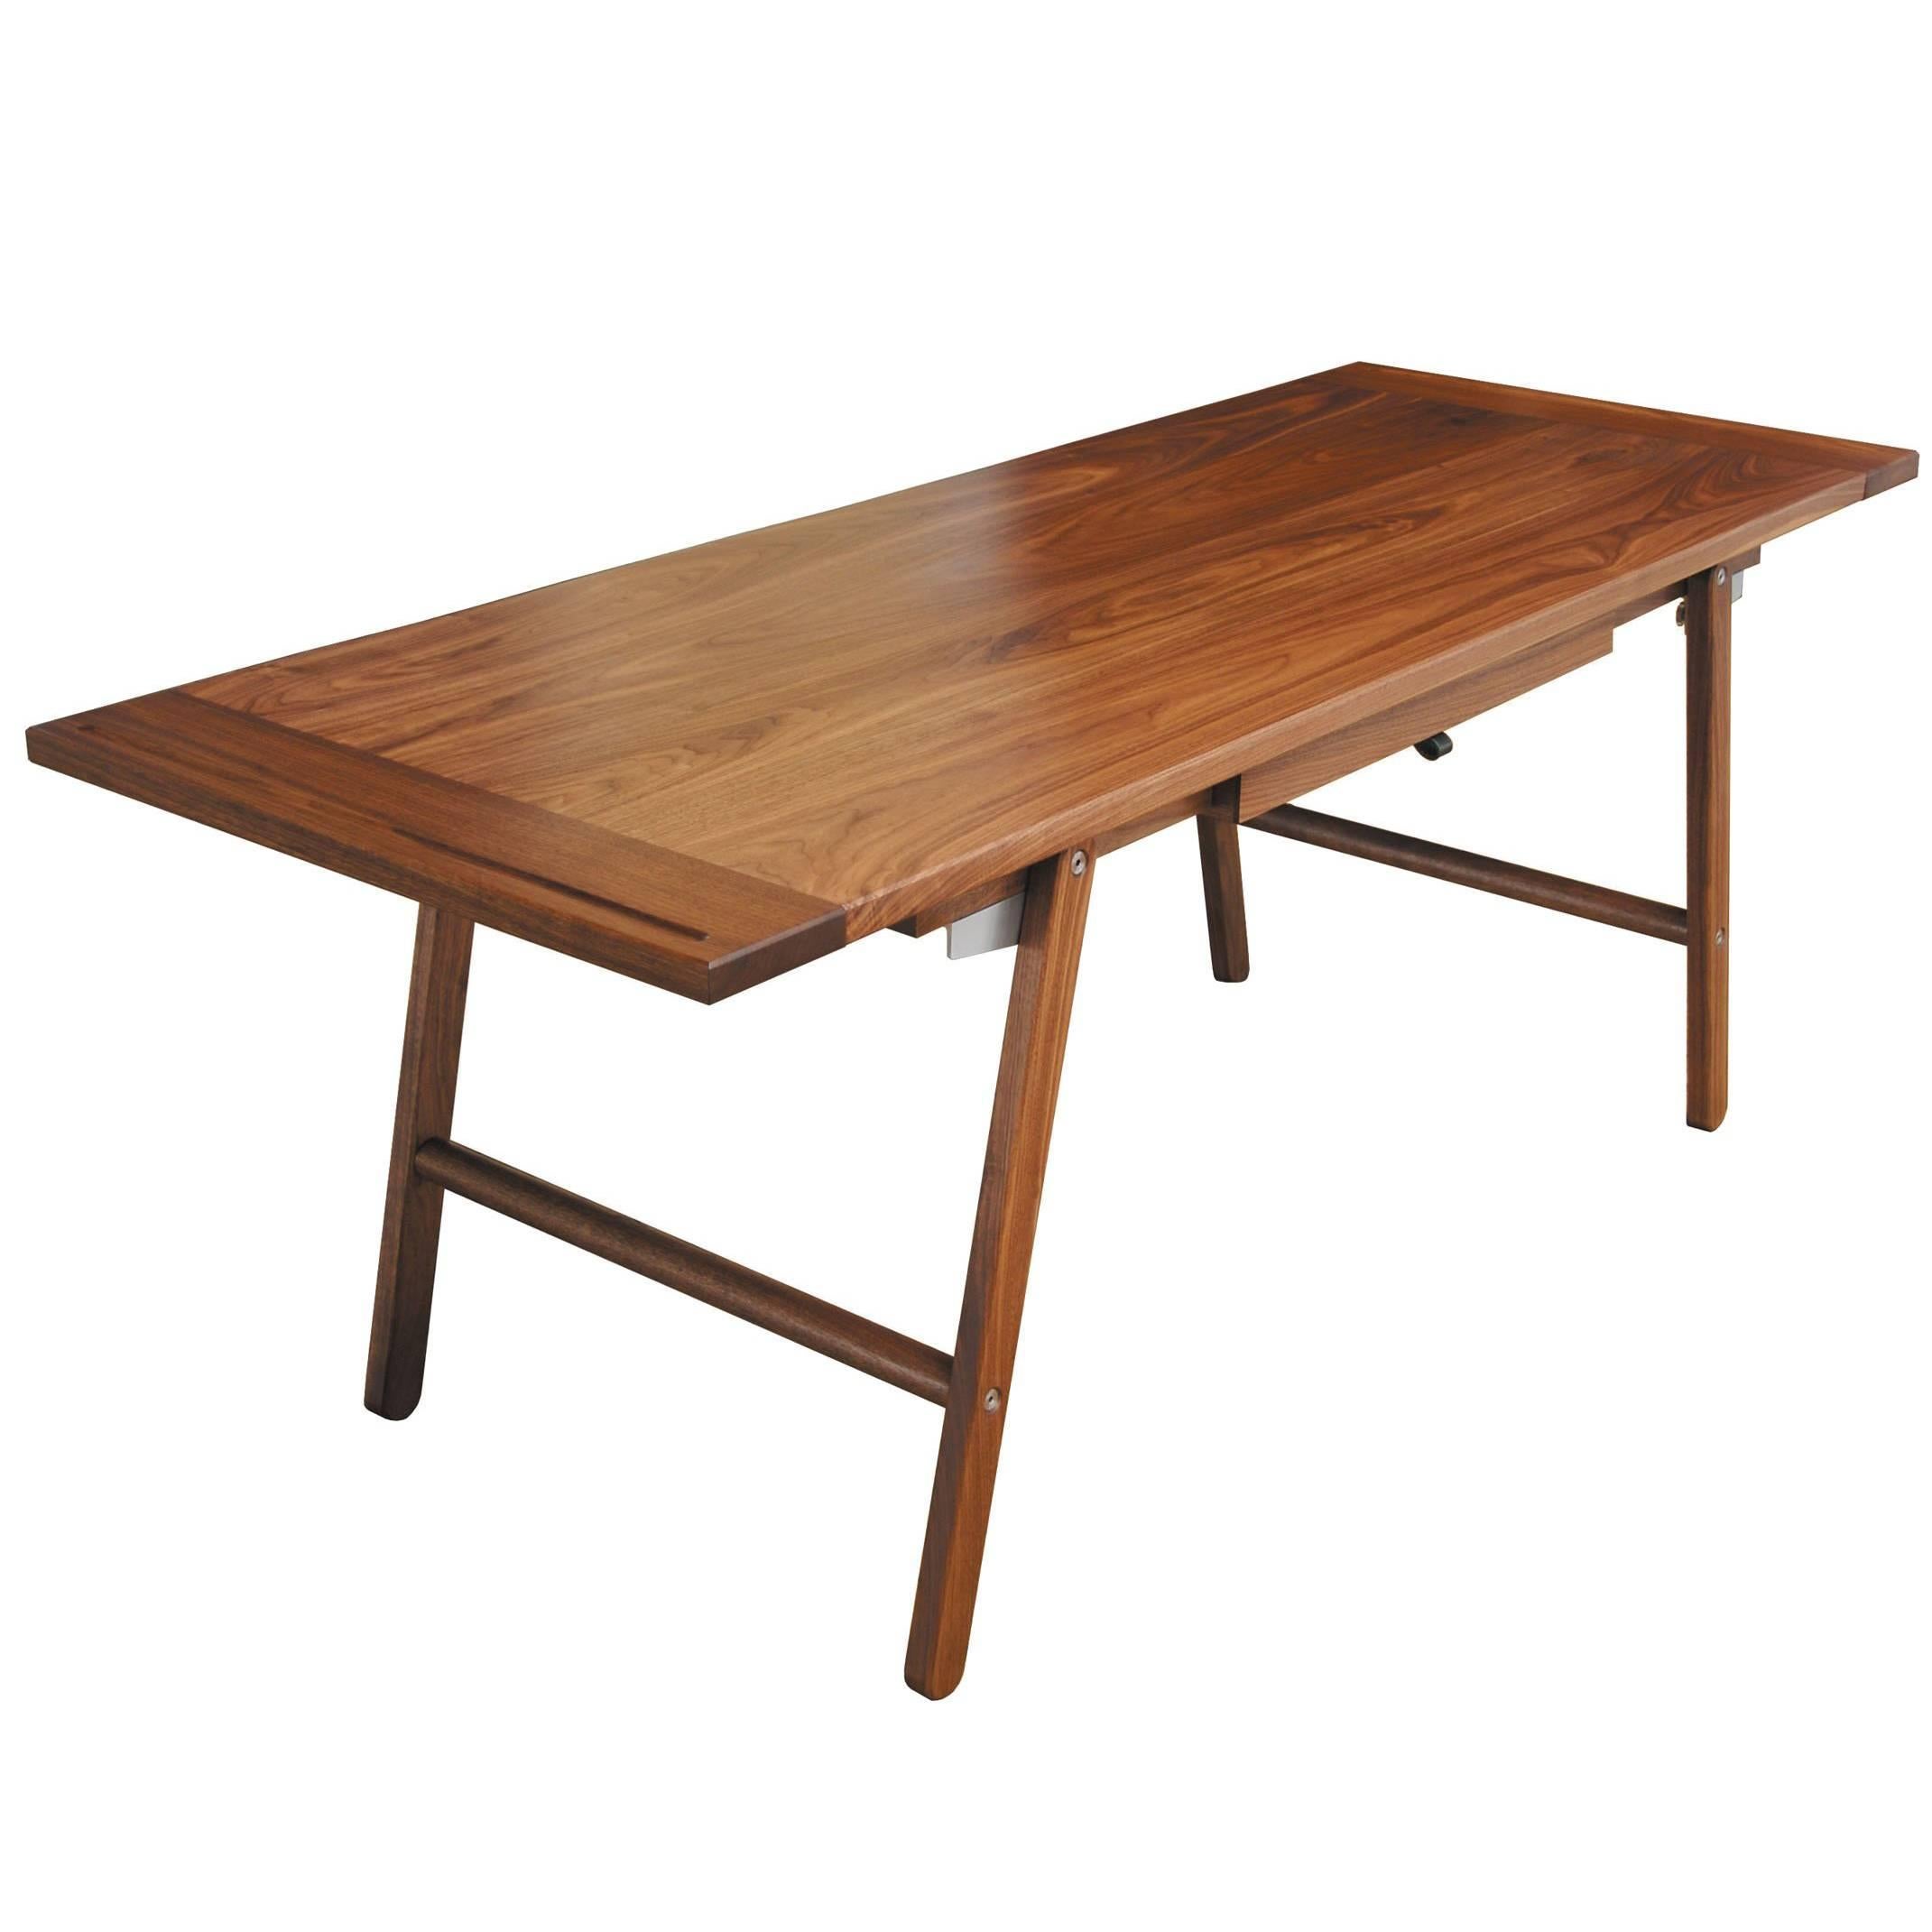 Lendon Desk in Oiled Walnut - handcrafted by Richard Wrightman Design